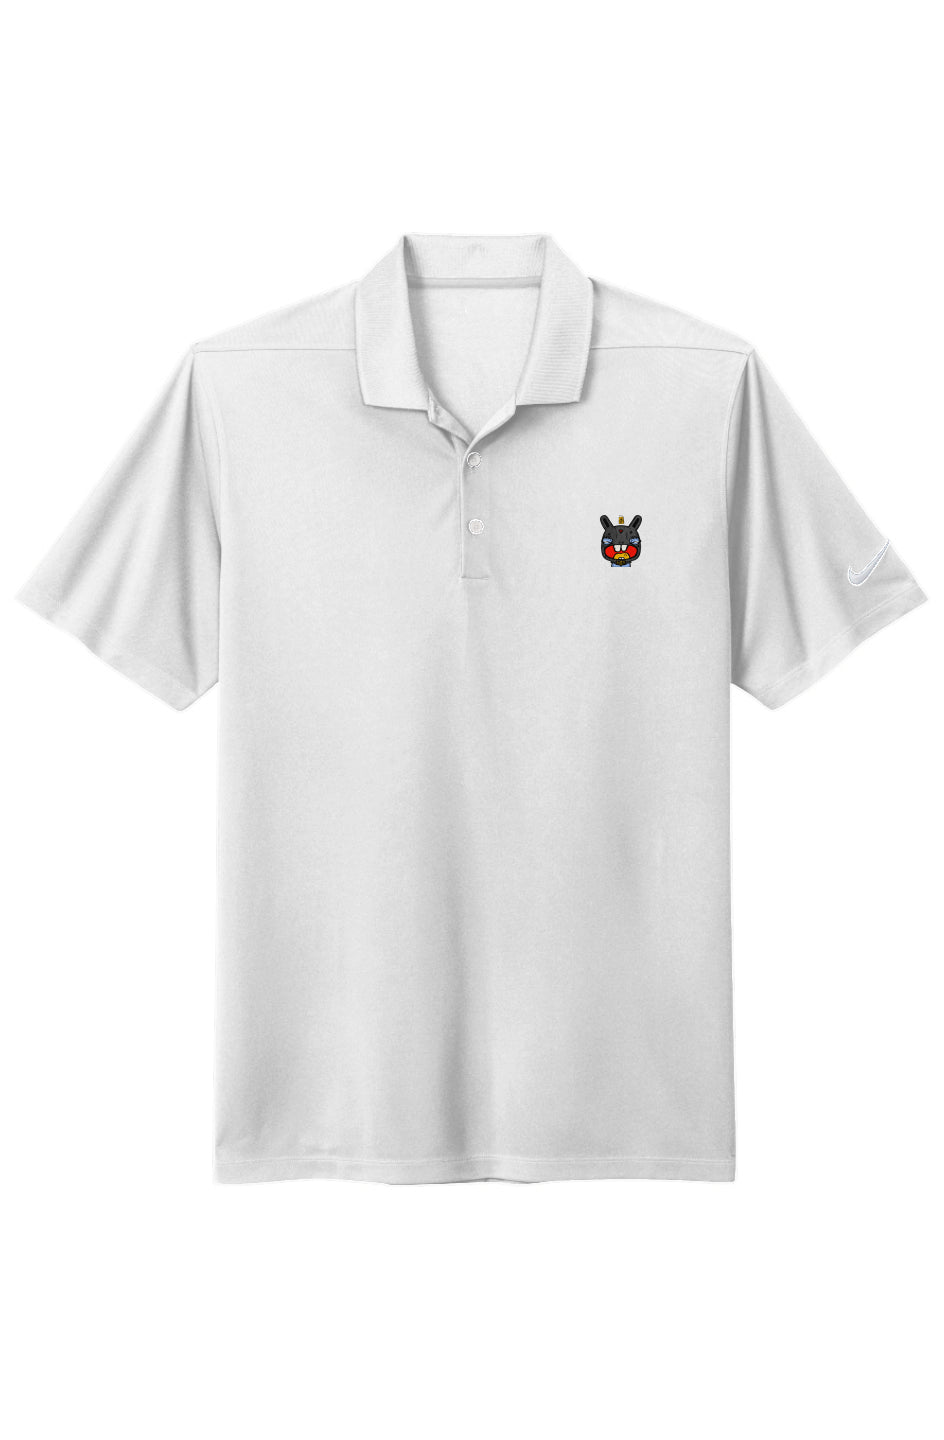 Nike Dri-FIT Micro Pique 2.0 Polo feat. NFT TKP BAD BUNNY #0978 by Sabet